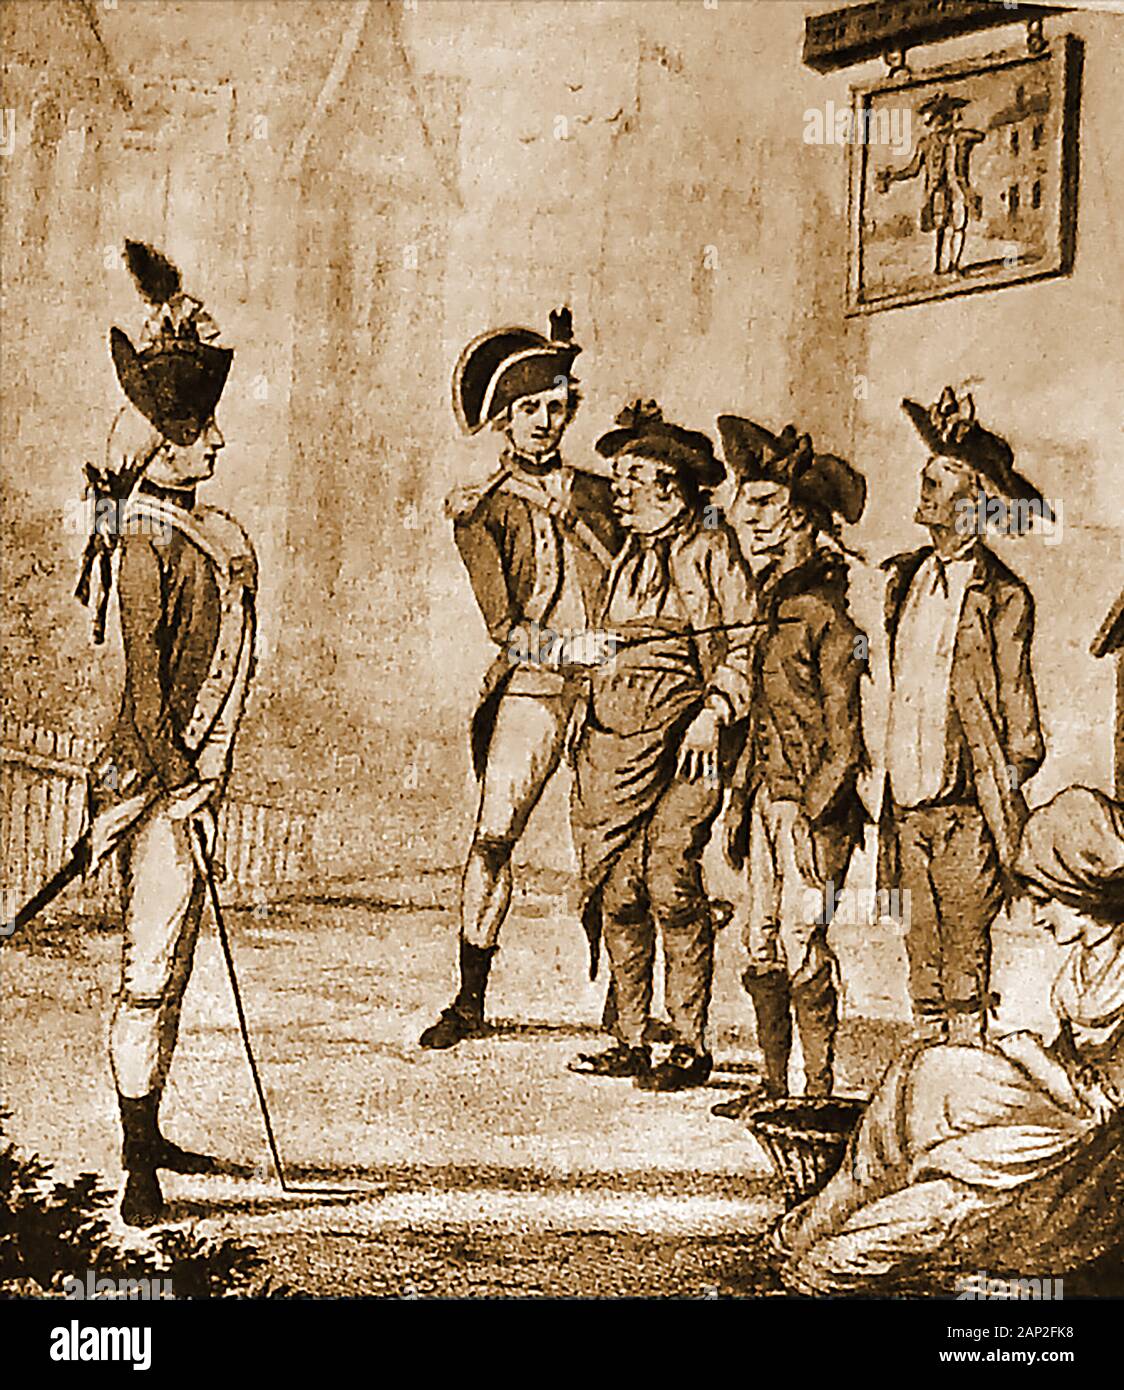 An 18th century scene showing new army recruits on parade in England. The British Army commenced with the unification of the Kingdoms of England and Scotland as  the Kingdom of Great Britain in 1707. Following the Recruiting Act 1778 and the Recruiting Act 1779, men could be impressed against their will, though mercenaries made up much of the armed forces. In addition men were also  released  from prison on the condition they joined the army . Irishmen and foreign nationals also joined the British army. Stock Photo